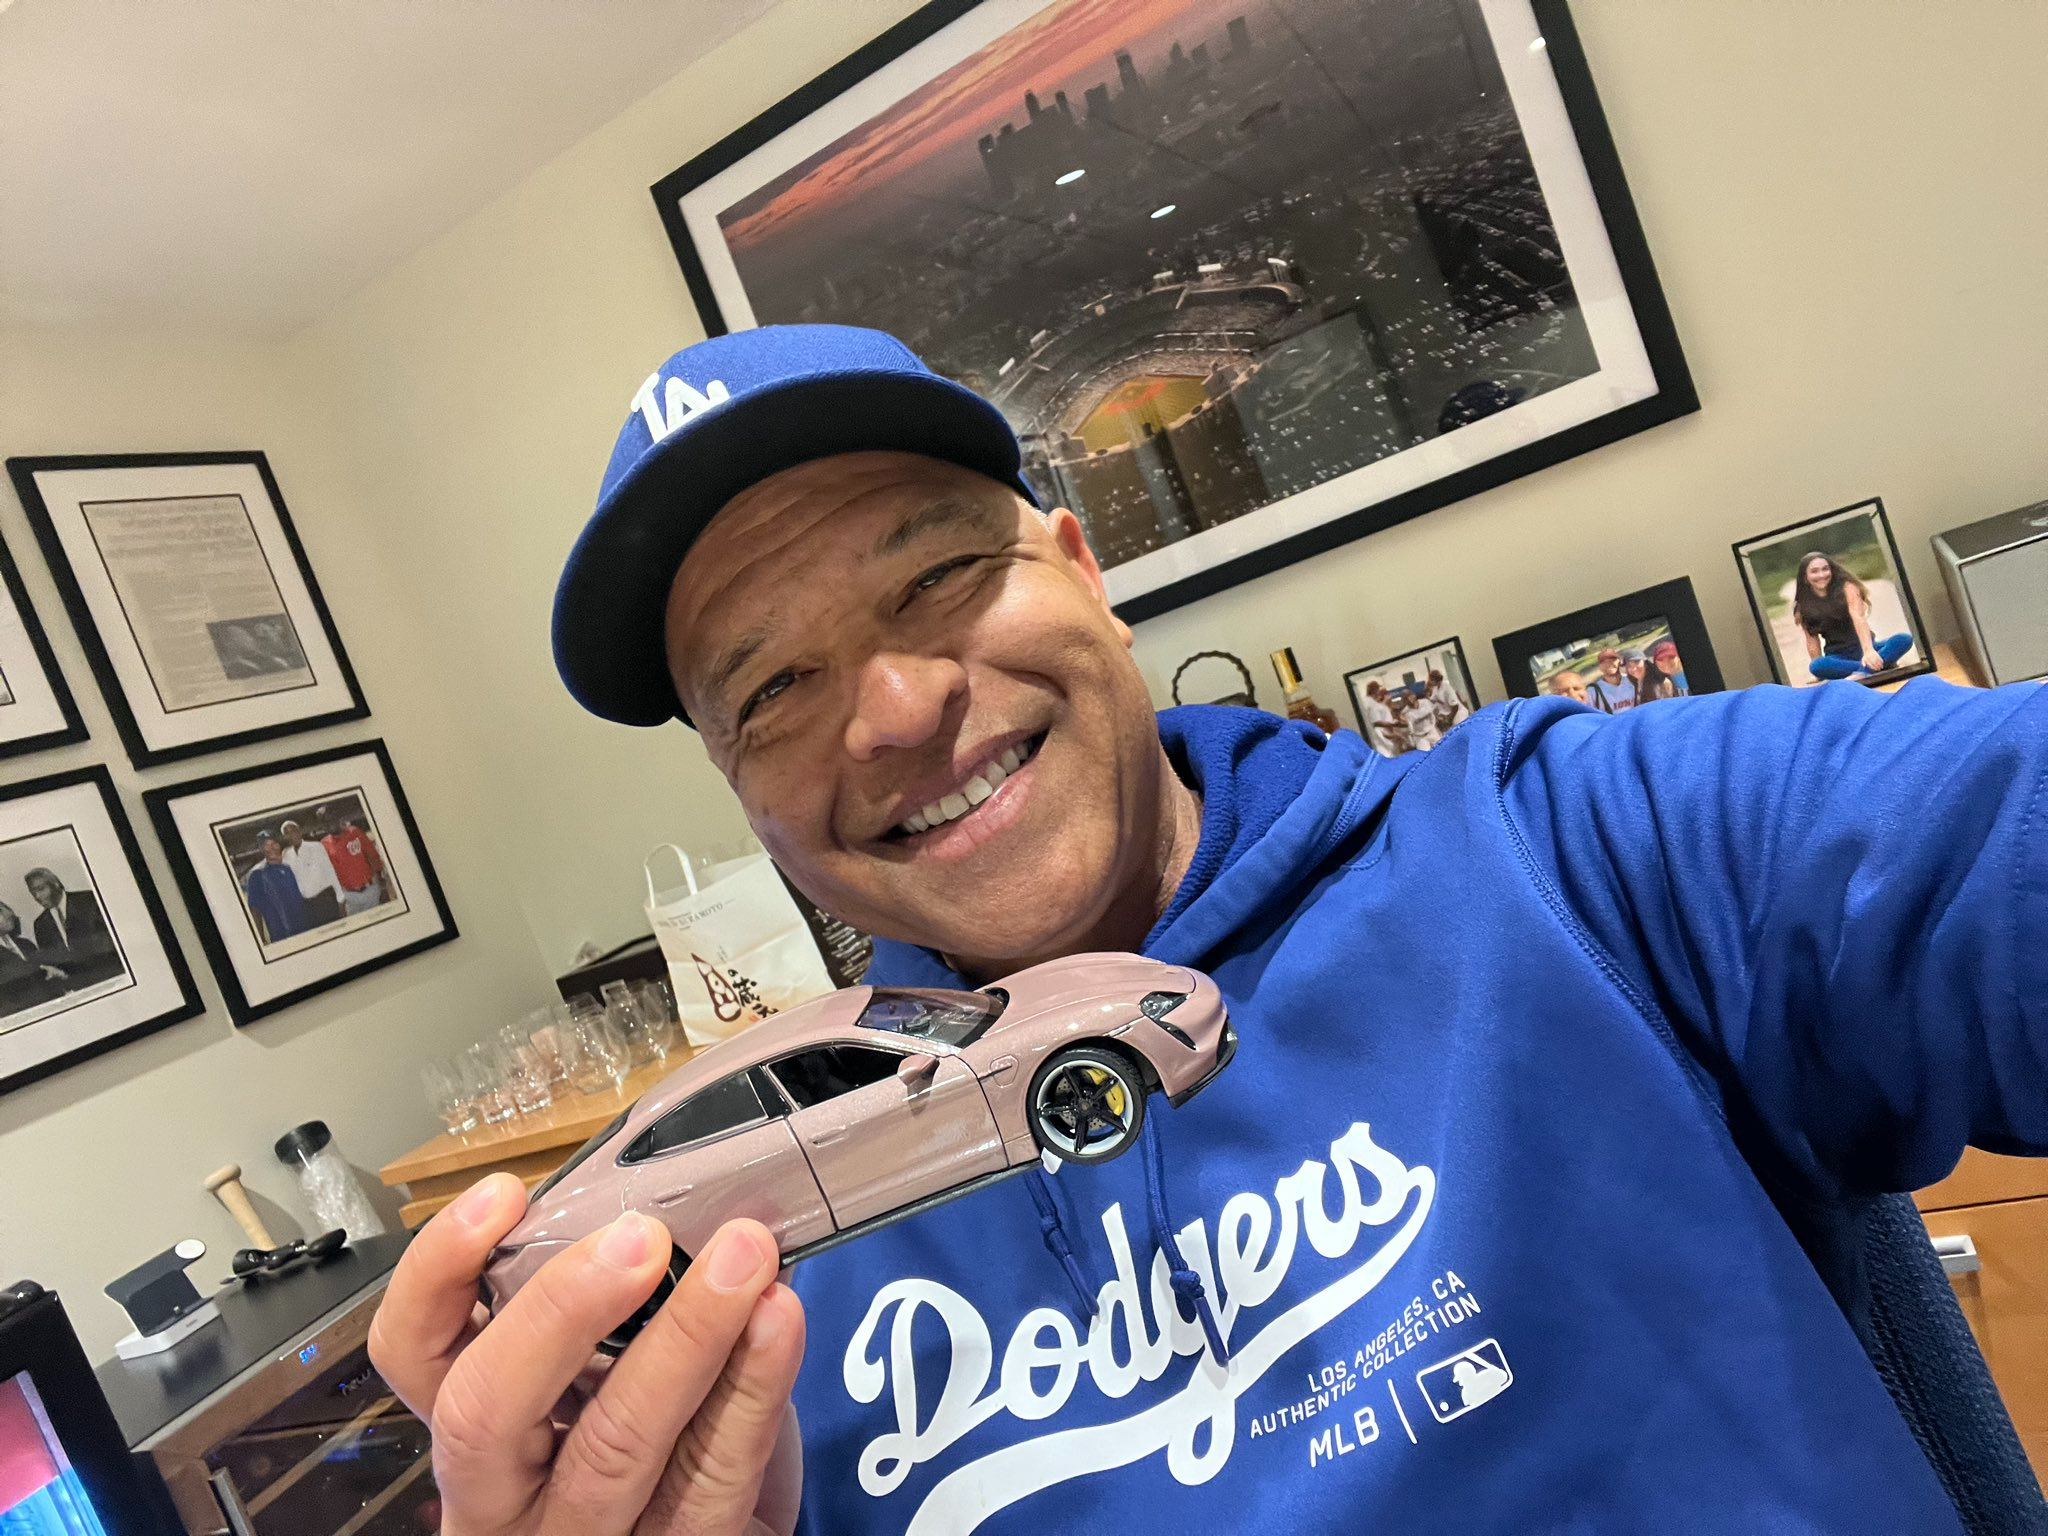 Shohei Ohtani continues to hand out Porsches. This time Dave Roberts gets one